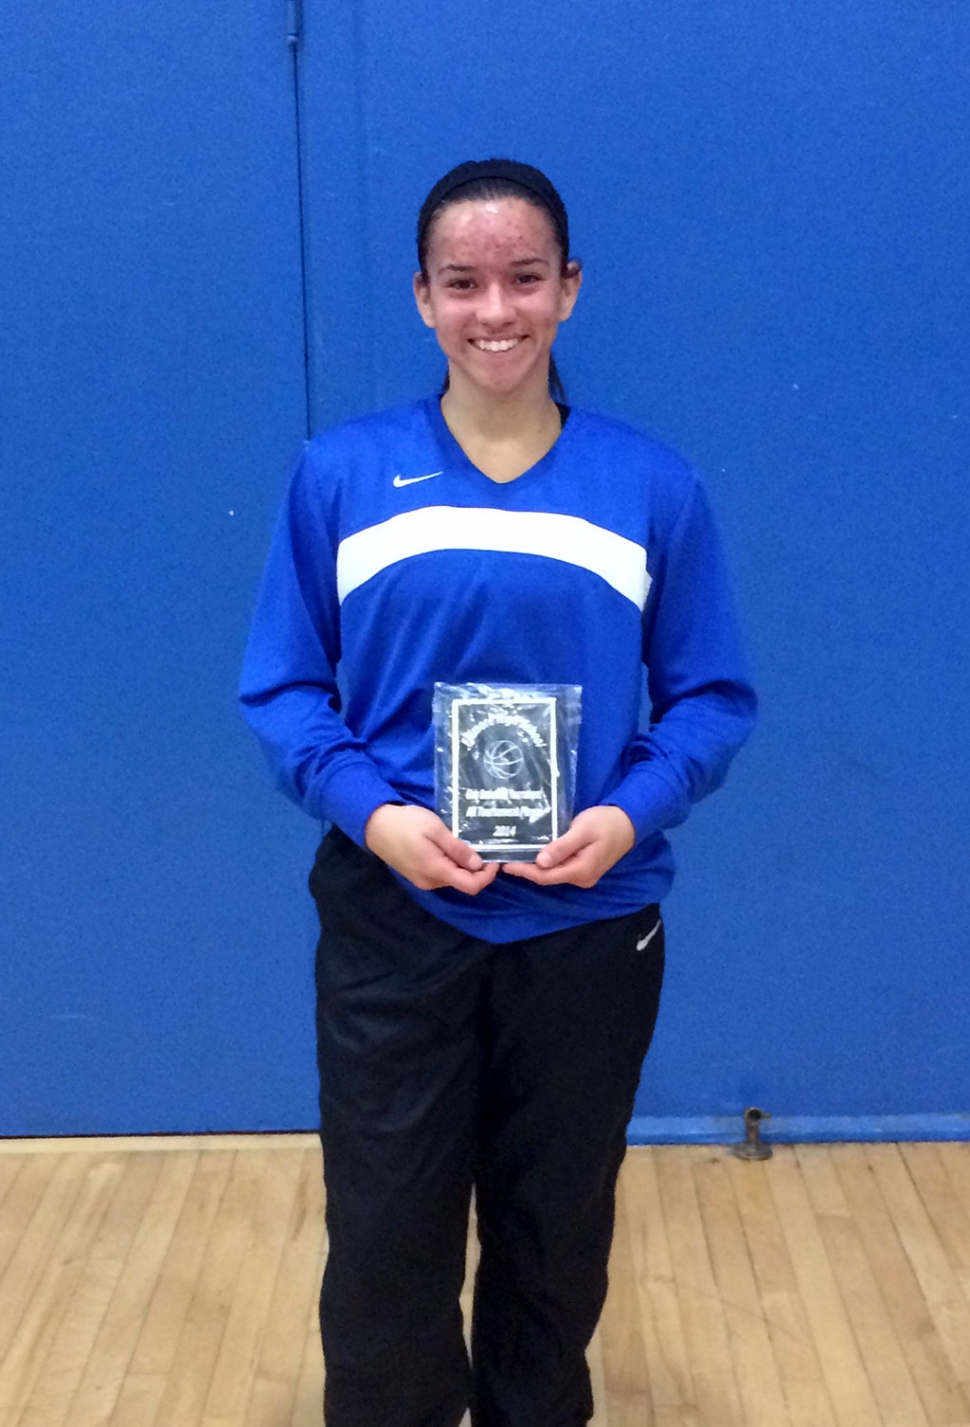 Senior Hannah Vasquez received the All Tournament Award at The Jolene Stethem Tournament for the Lady Flashes early this December. Hannah is a Captain for the Lady Flashes, a four year player and the starting point guard. Her leadership and dedication to the sport has been an integral part to her team. Congratulations Hannah on a fine performance at the Fillmore Tournament. The Lady Flashes will open with the first league game on January 6th against Foothill Technology. Go Flashes!